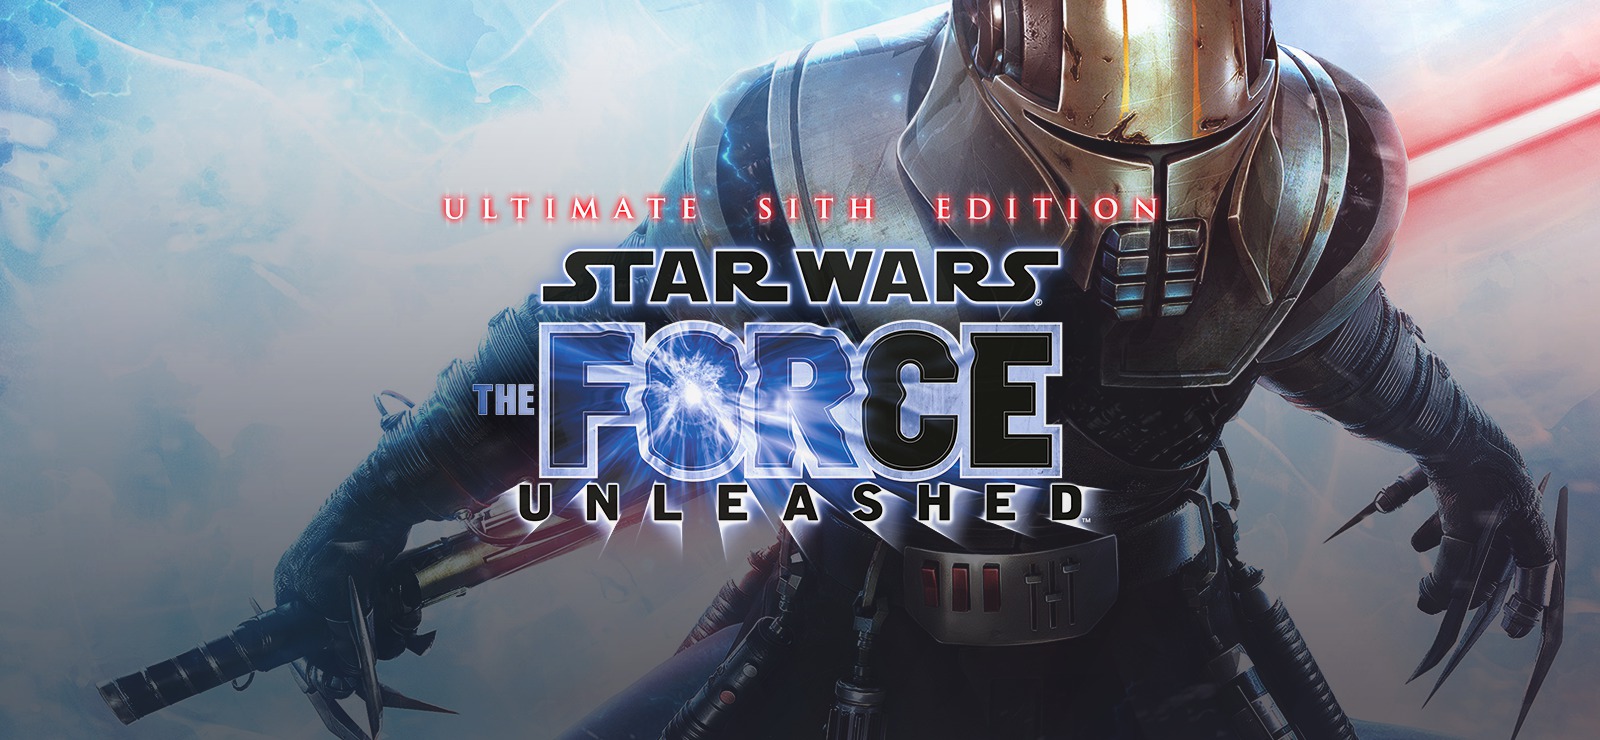 star wars the force unleashed ultimate sith edition ps2